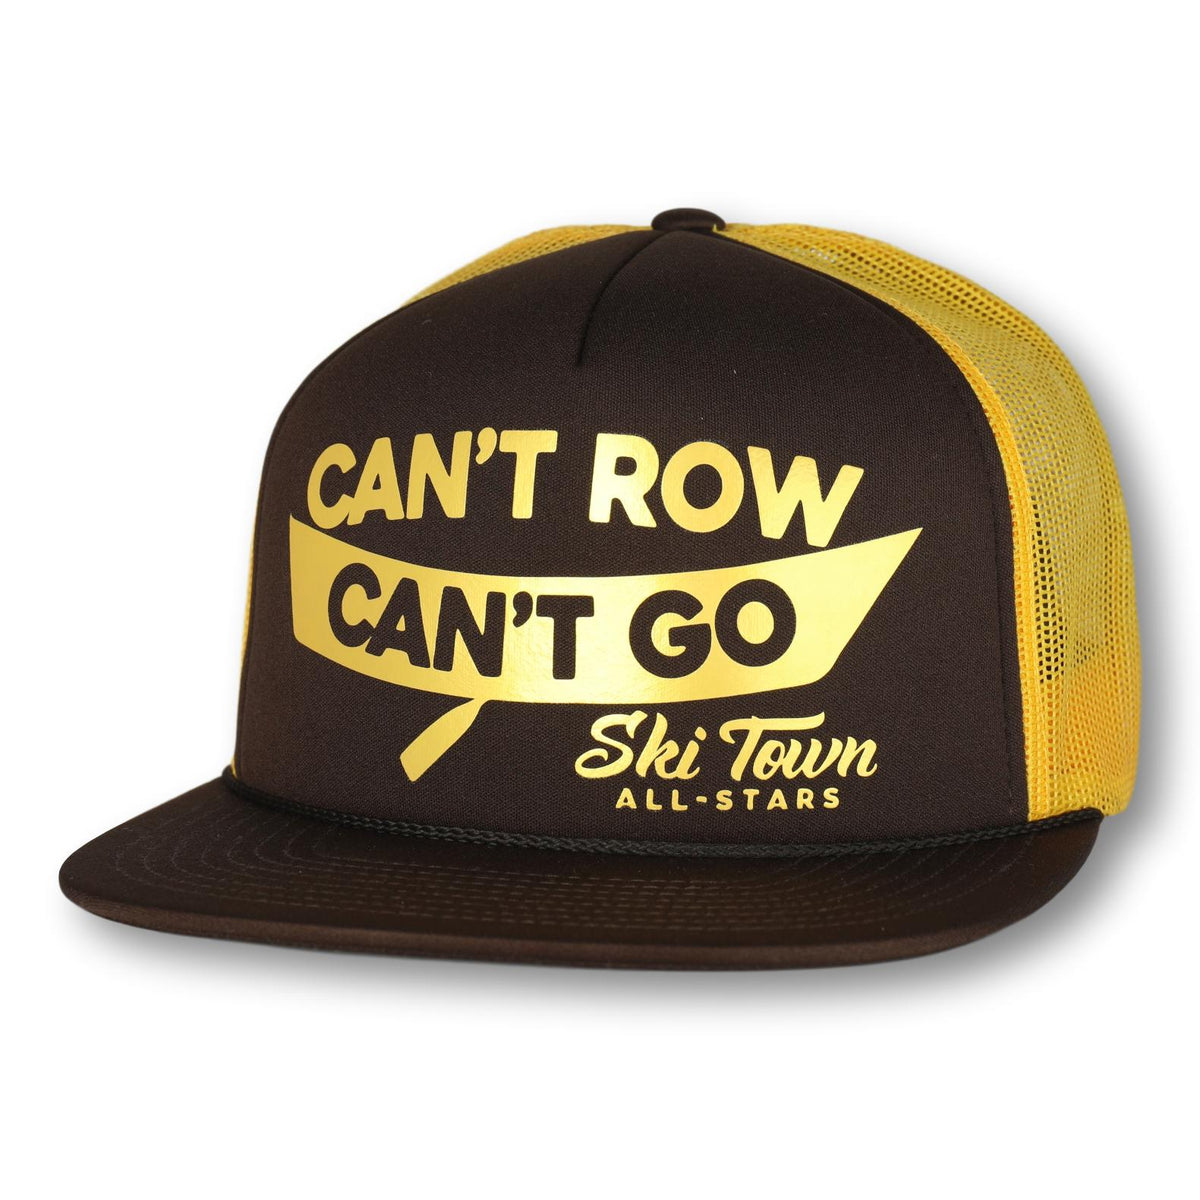 CAN'T ROW CAN'T GO - Ski Town All-Stars